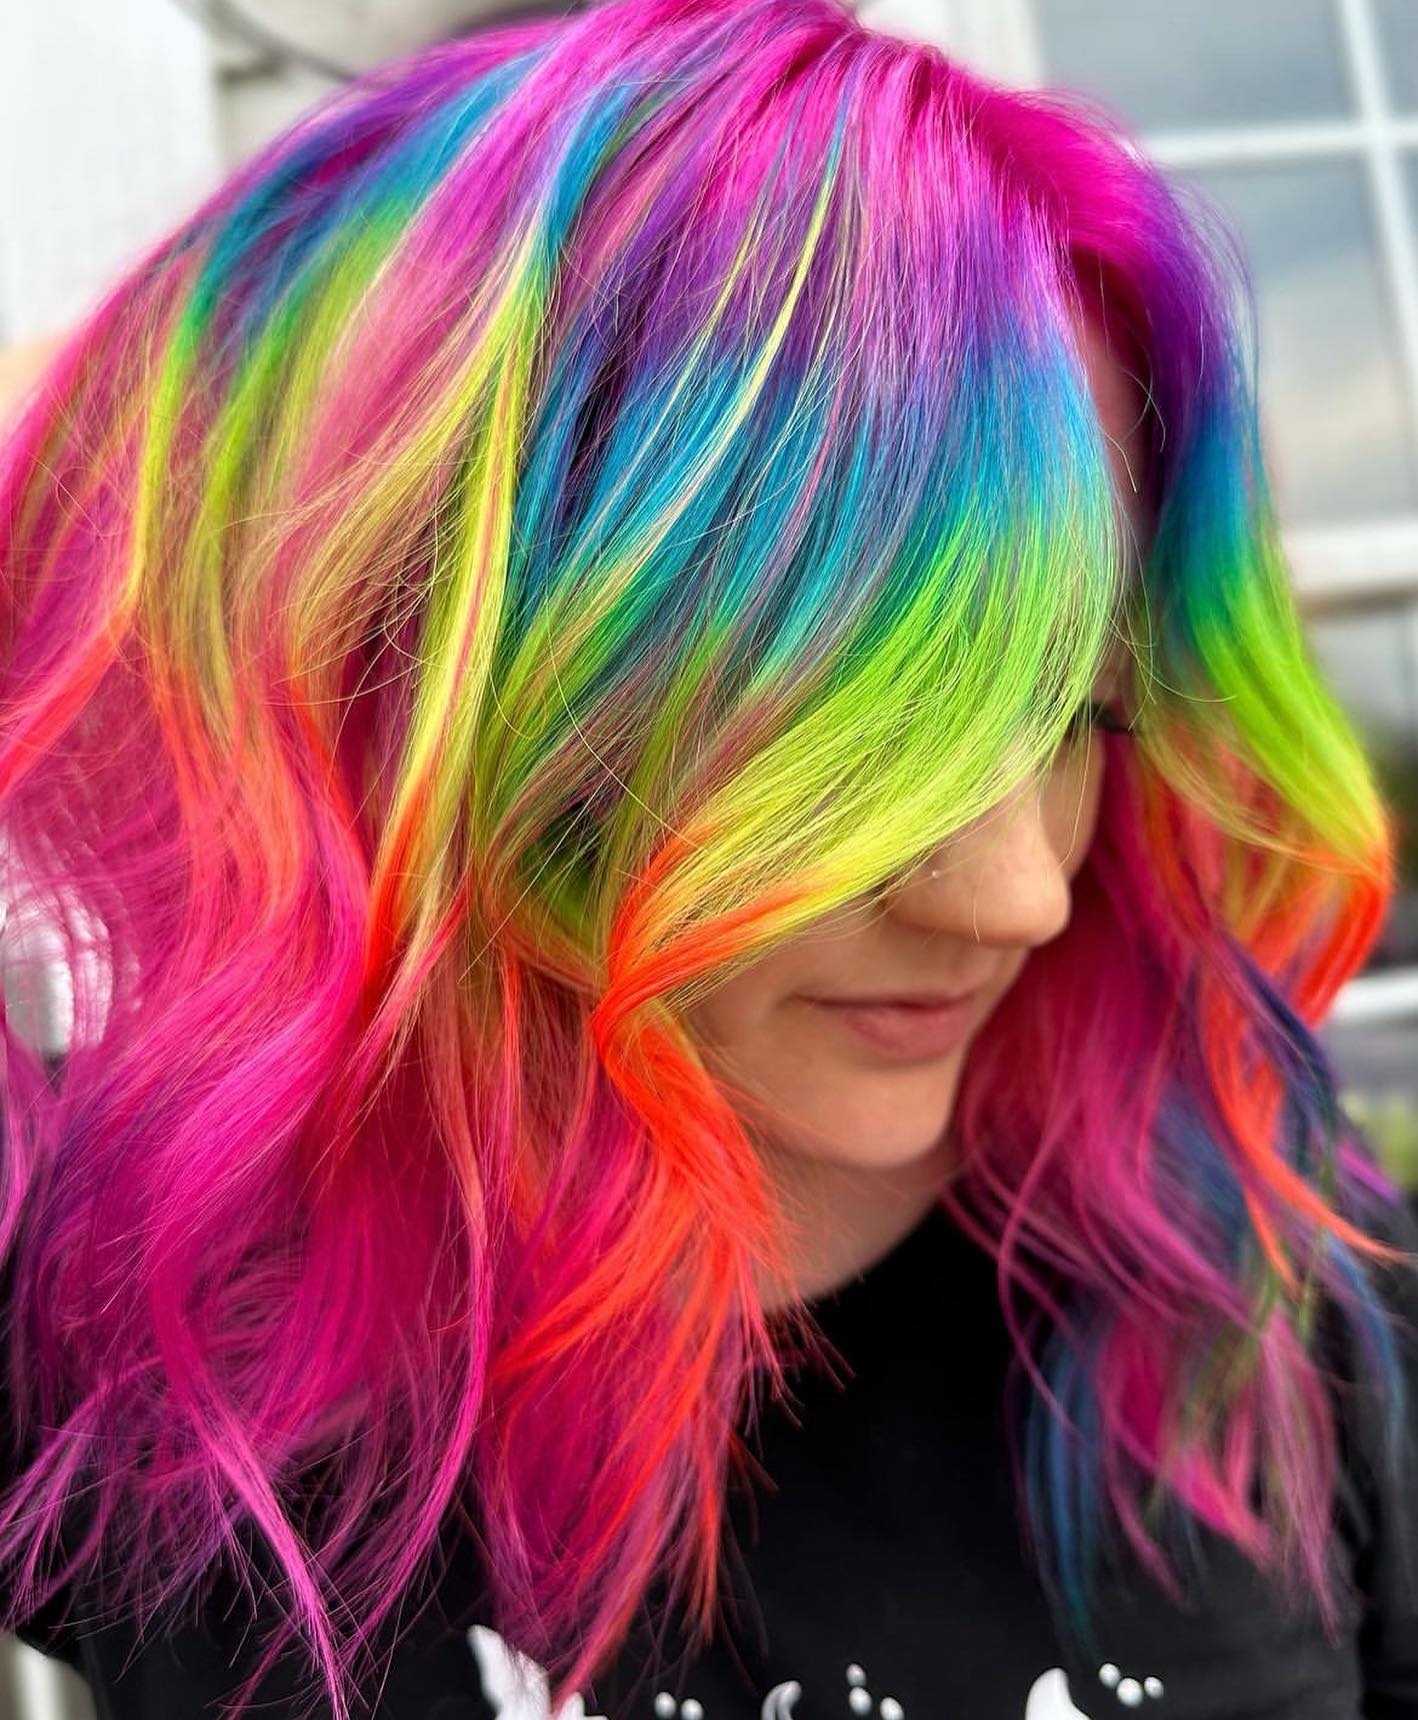 100+ Best Colorful Hair Ideas images 47